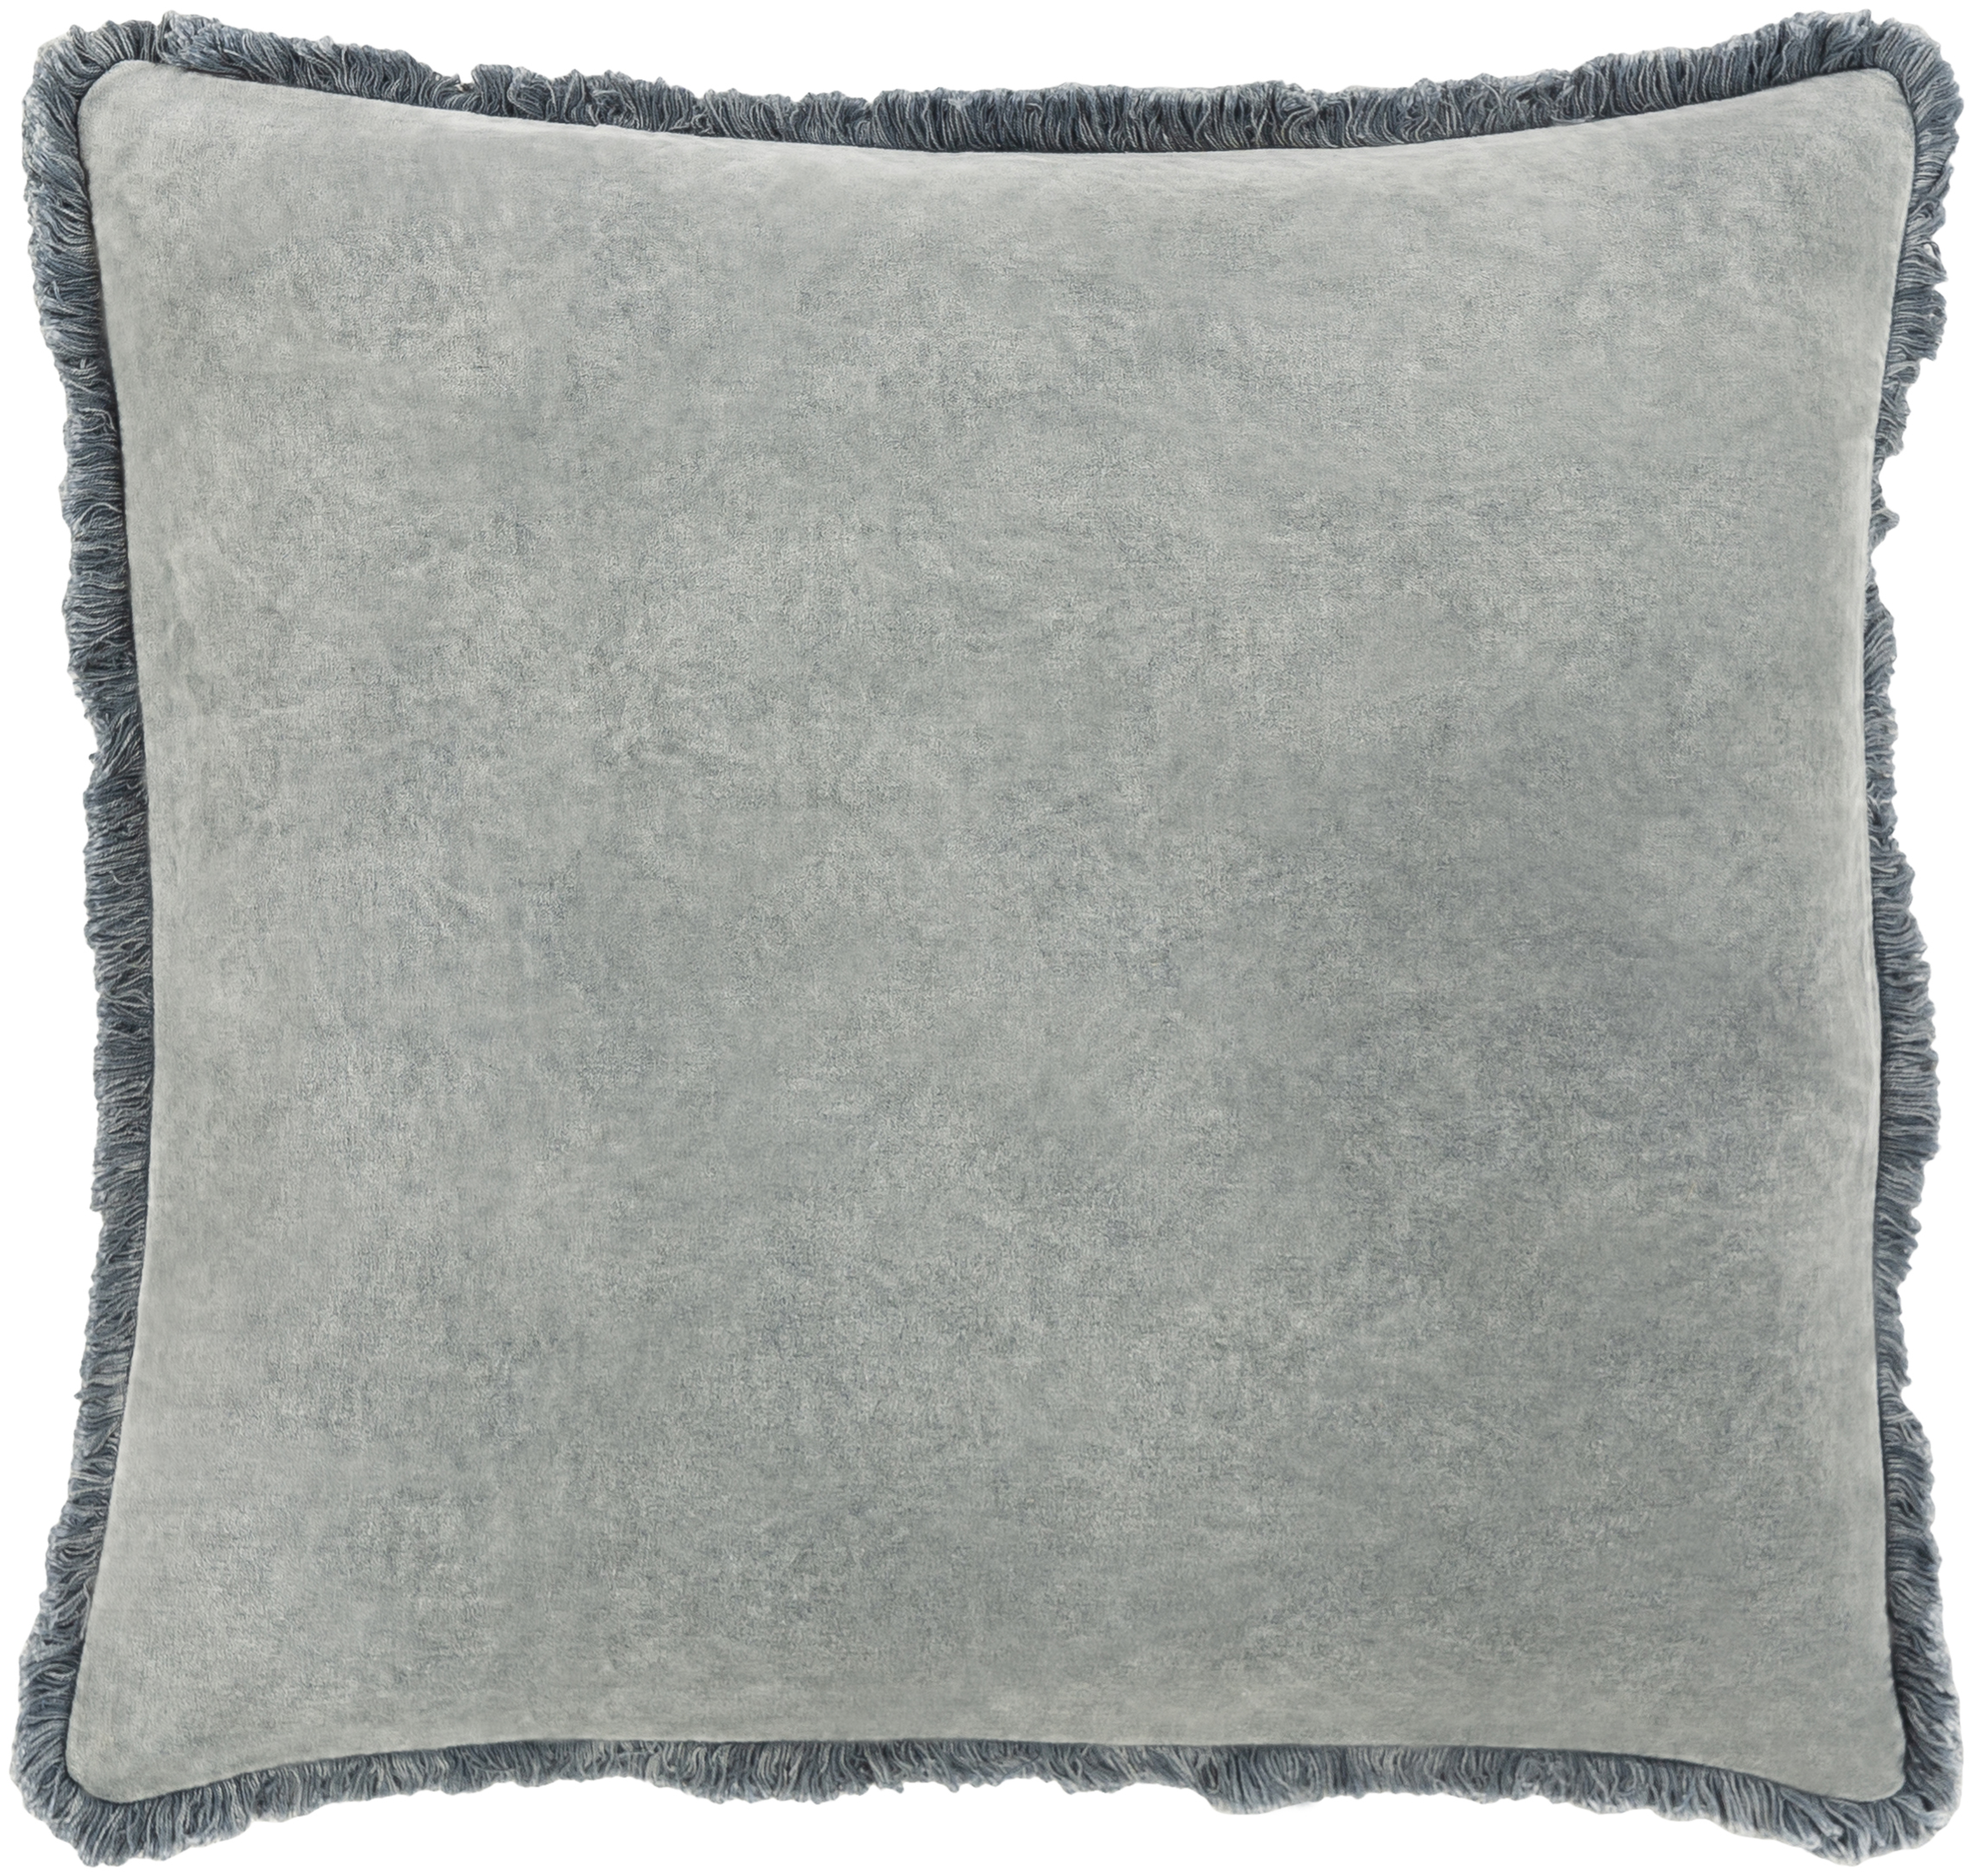 Washed Cotton Velvet Throw Pillow, 20" x 20", with down insert - Surya